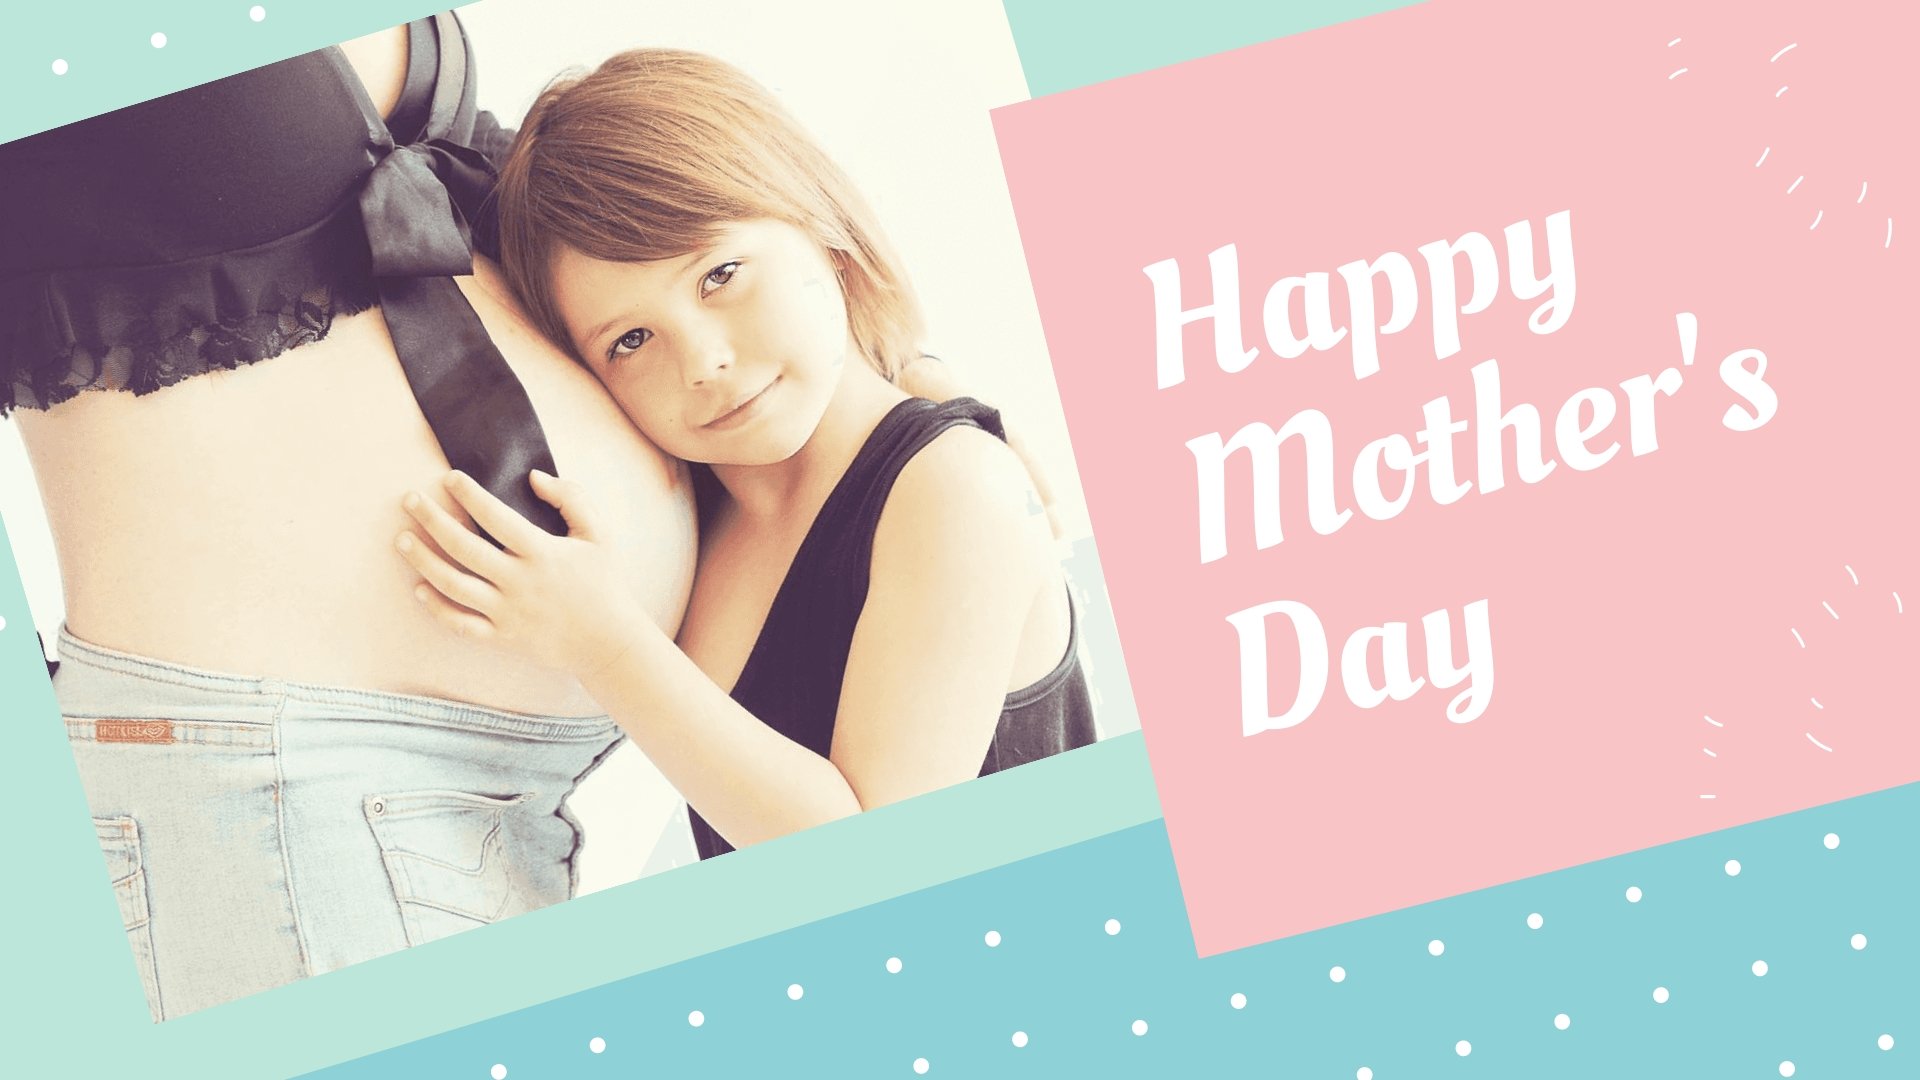 Happy Mother's Day Daughter Image